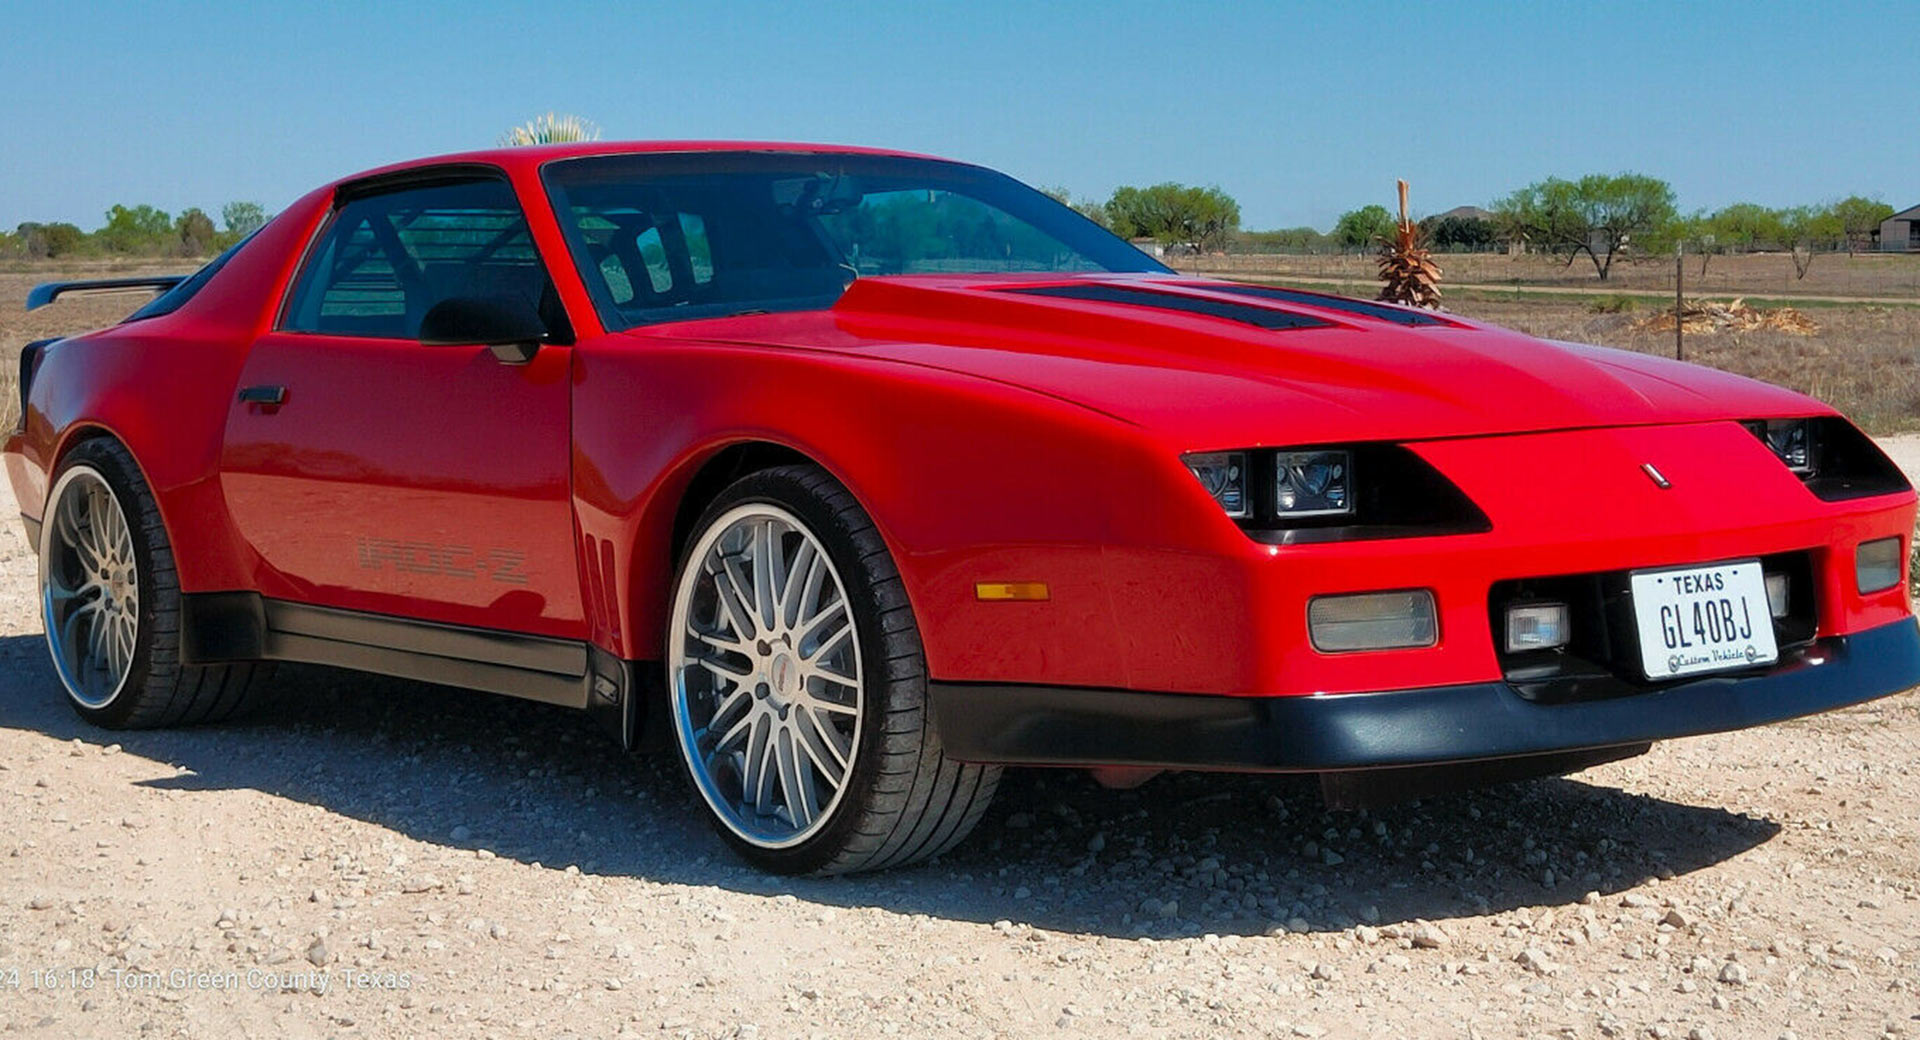 An LS7 V8 Sends This Widebody '86 Camaro Restomod To 60 MPH In A Claimed  Sub-3 Seconds | Carscoops